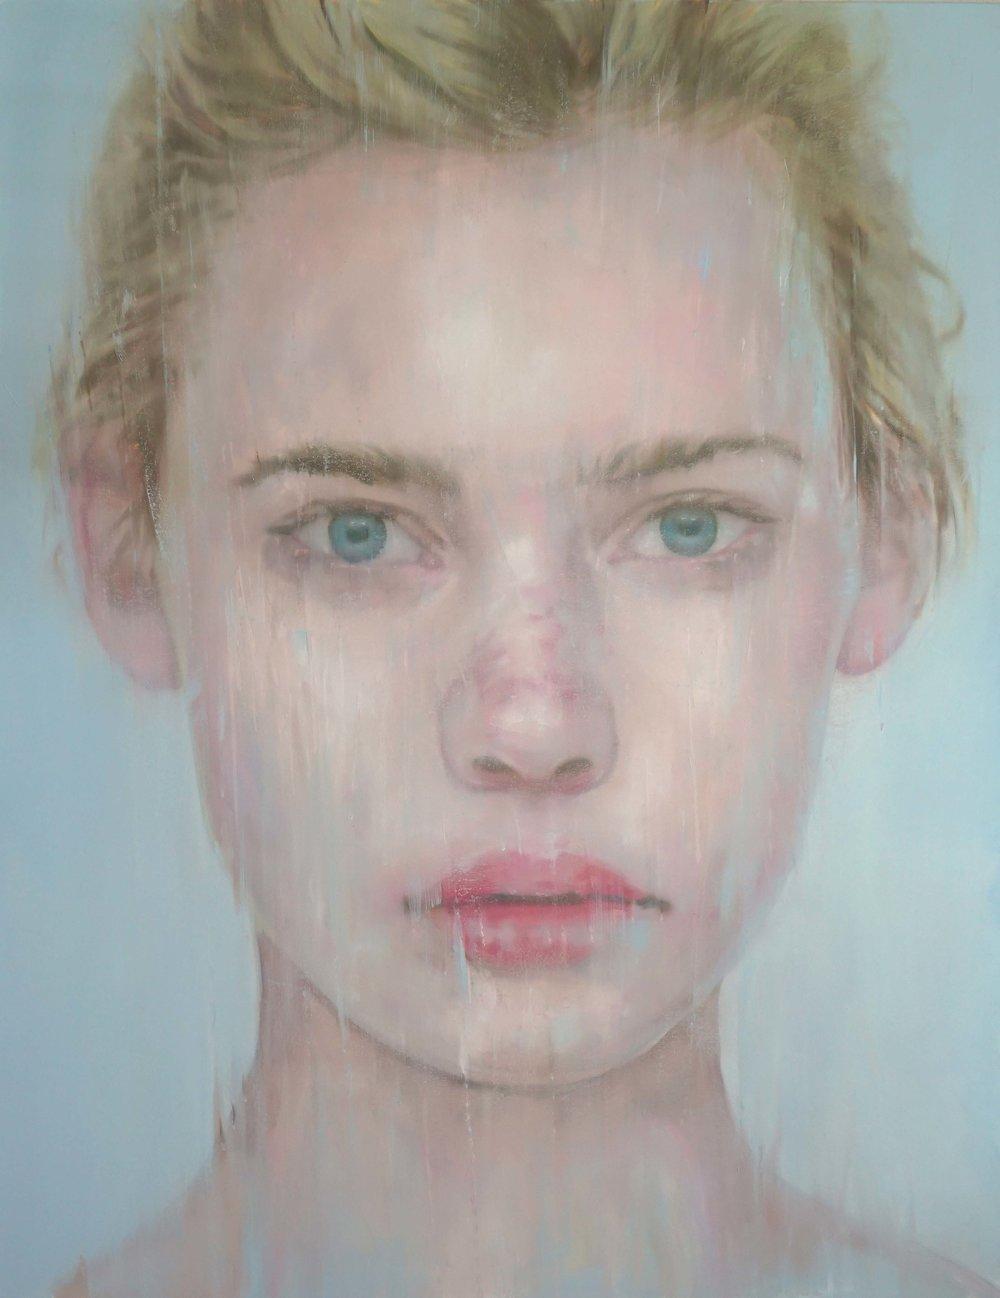 tgb C. 1-17, Mixed Media on Canvas Painting by Sebastian Herzau, 2017

Painting both portraits and landscapes, Sebastian Herzau’s artworks share a common blurred, enigmatic effect through his use of soft pastel colours, veiled layering and subtle